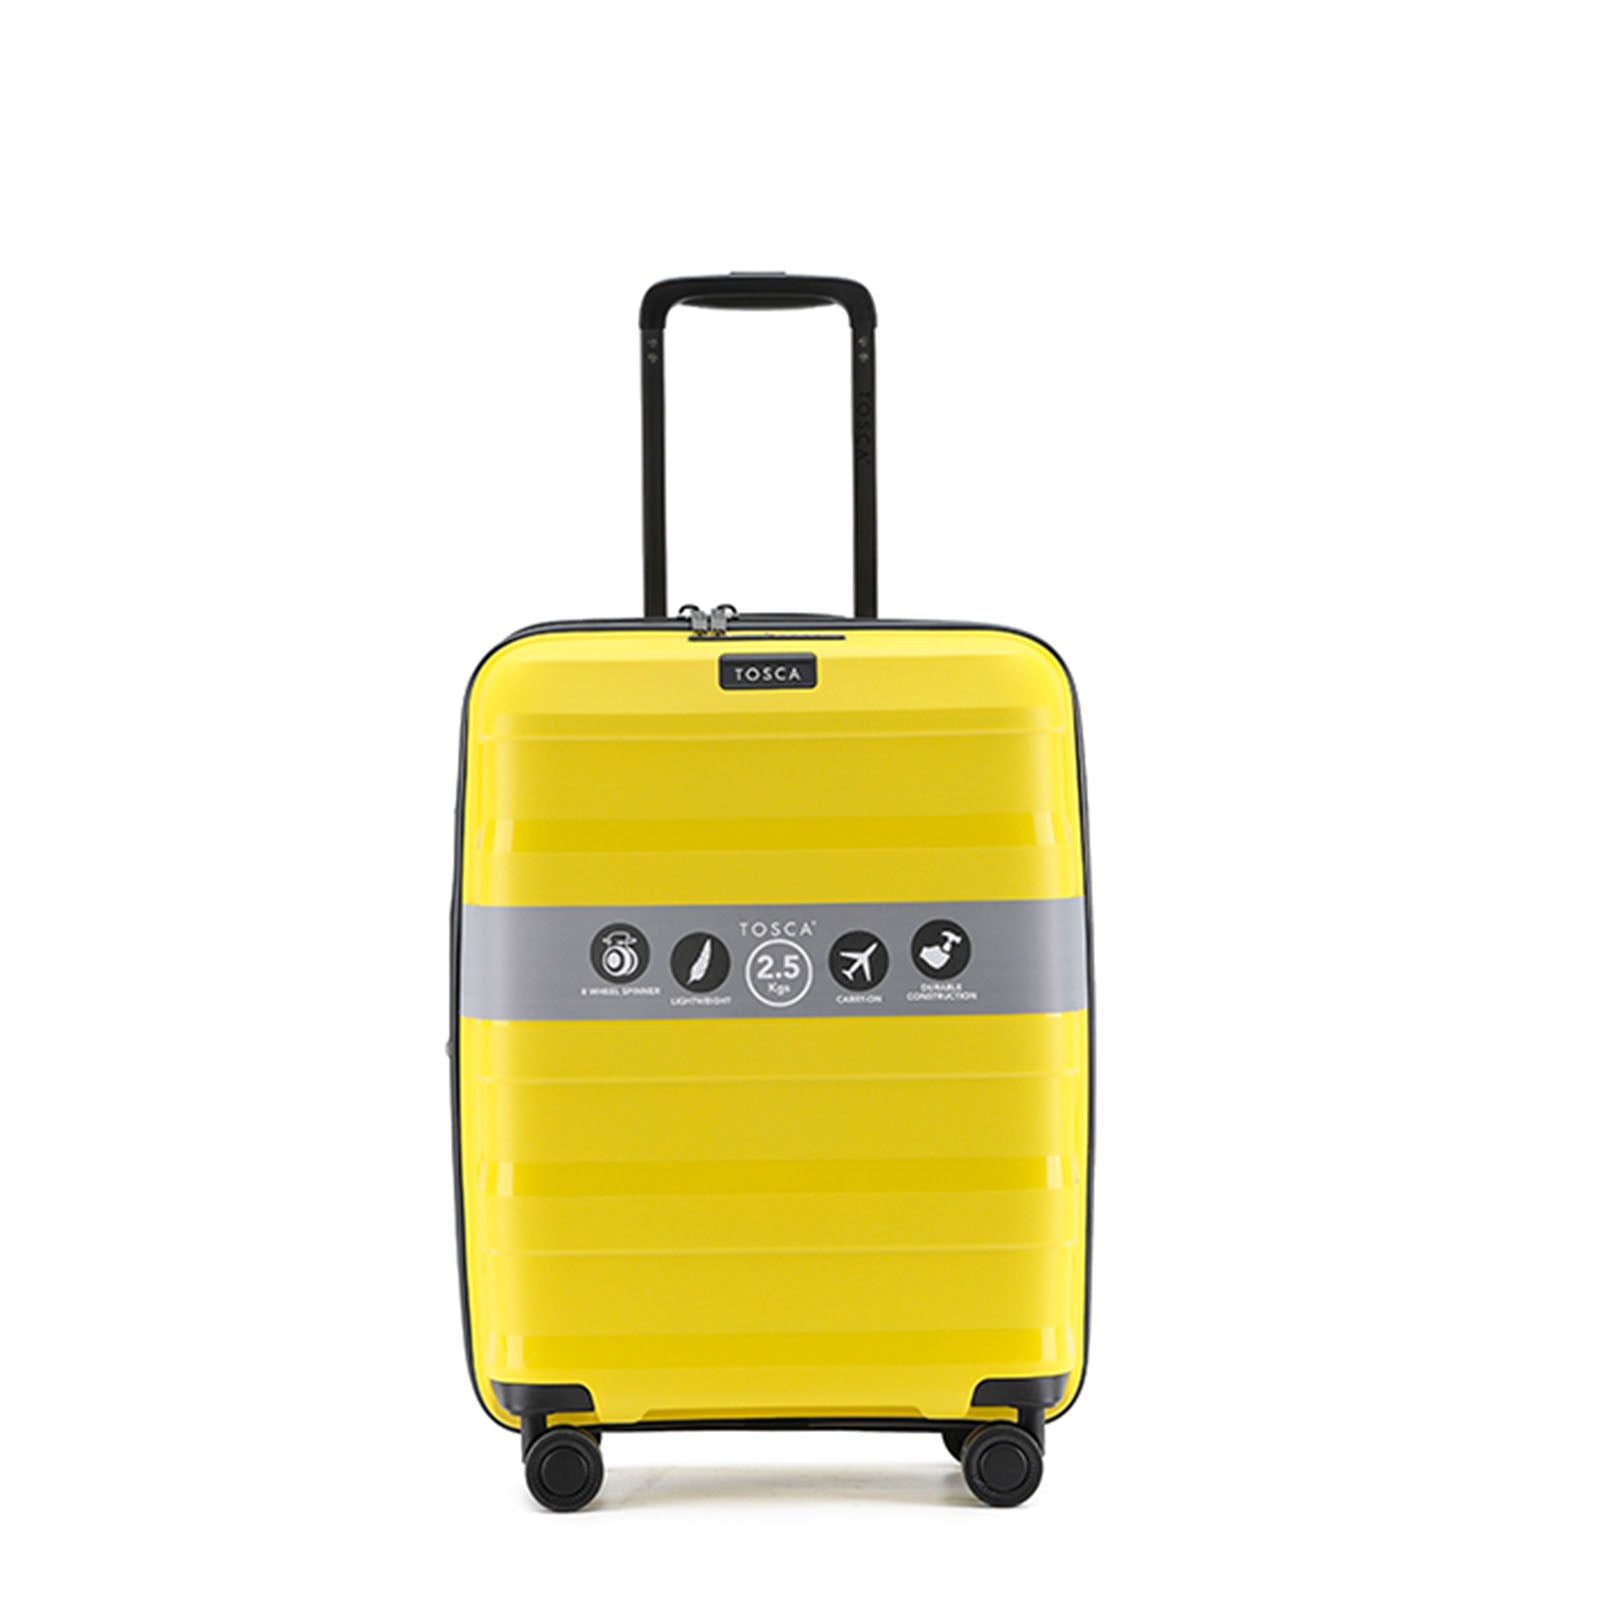 Tosca-Comet-4-Wheel-55cm-Carry-On-Suitcase-Yellow-Front